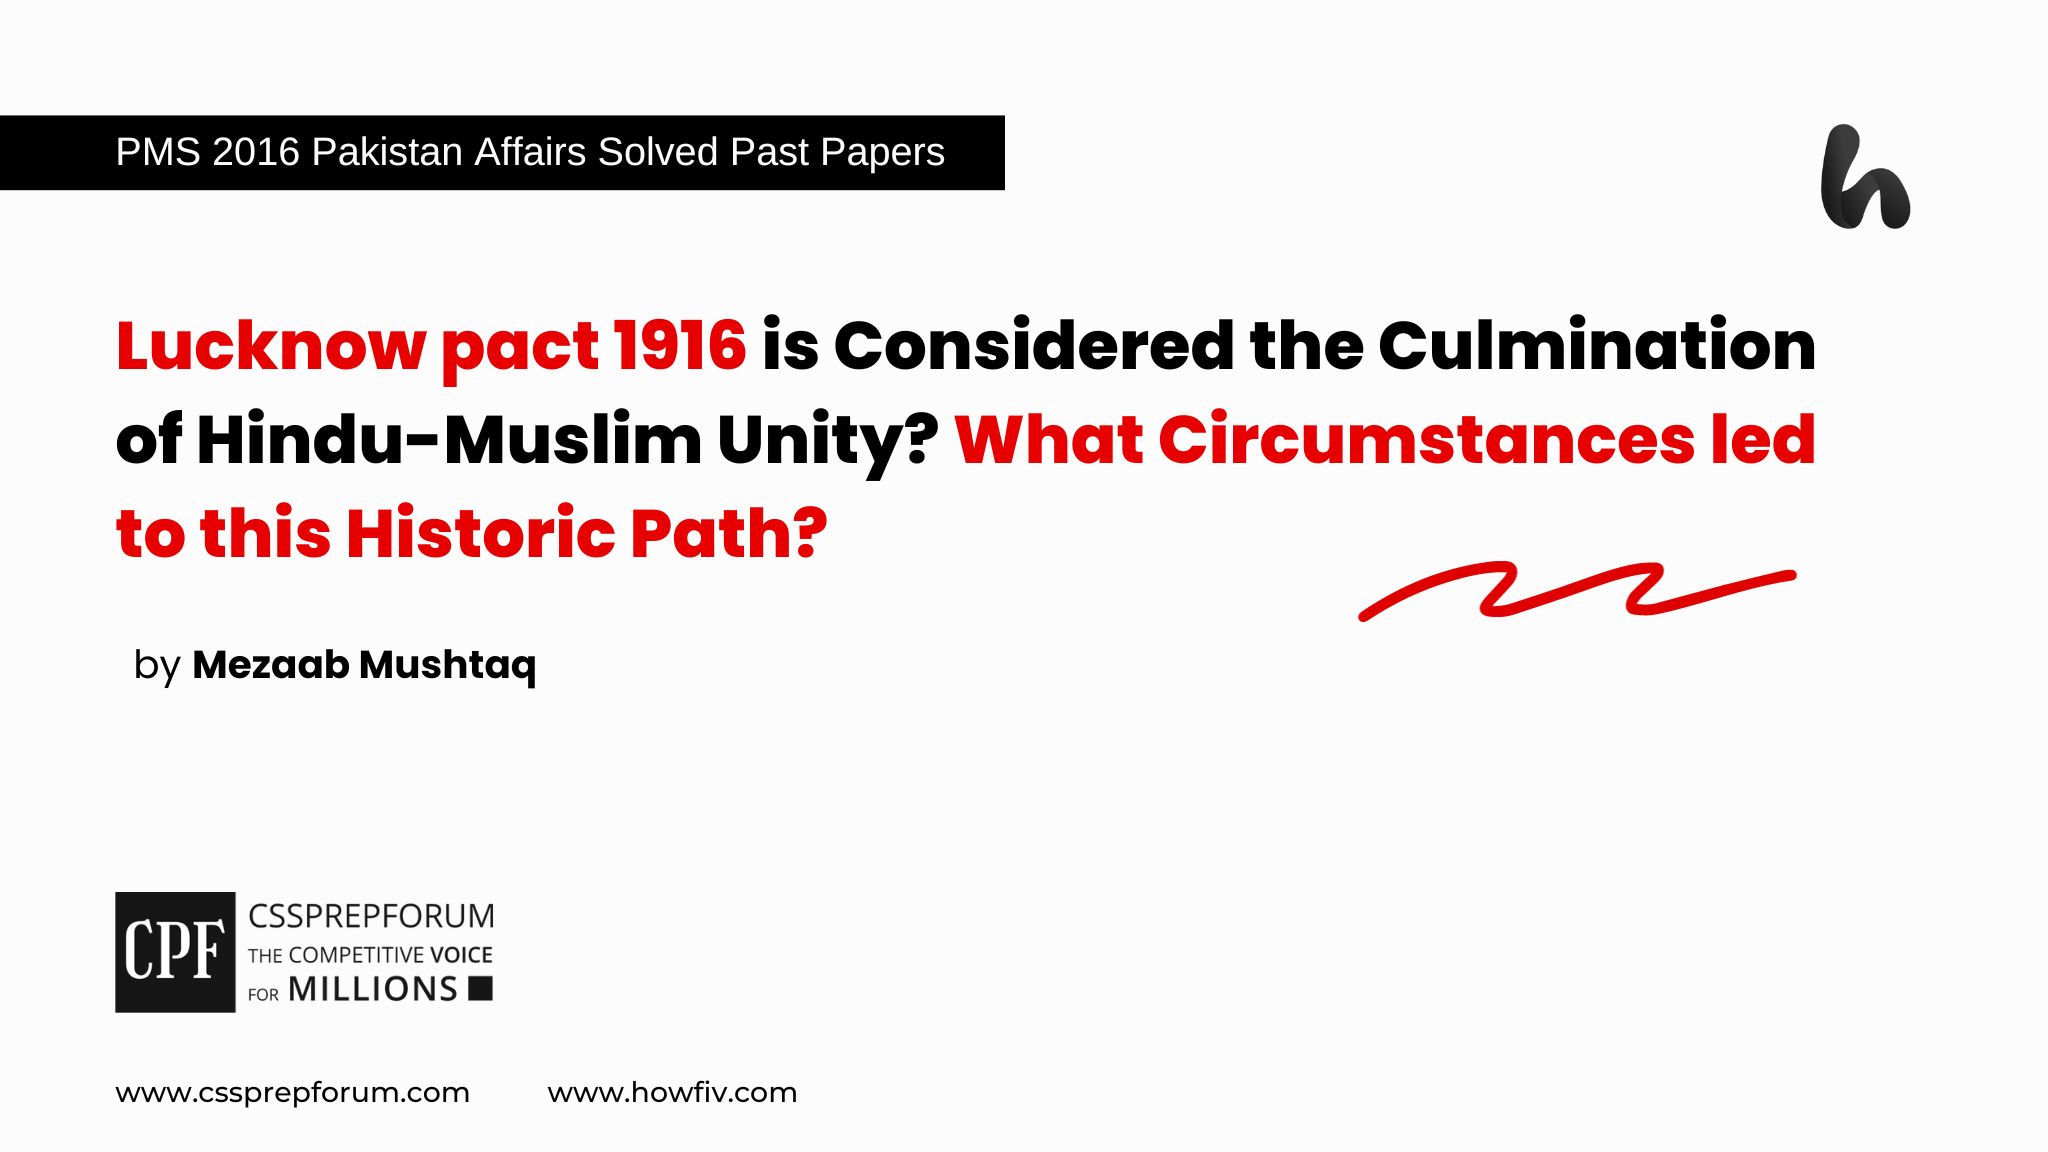 Lucknow Pact 1916 is Considered the Culmination of Hindu-Muslim Unity? What Circumstances led to this Historic Path?